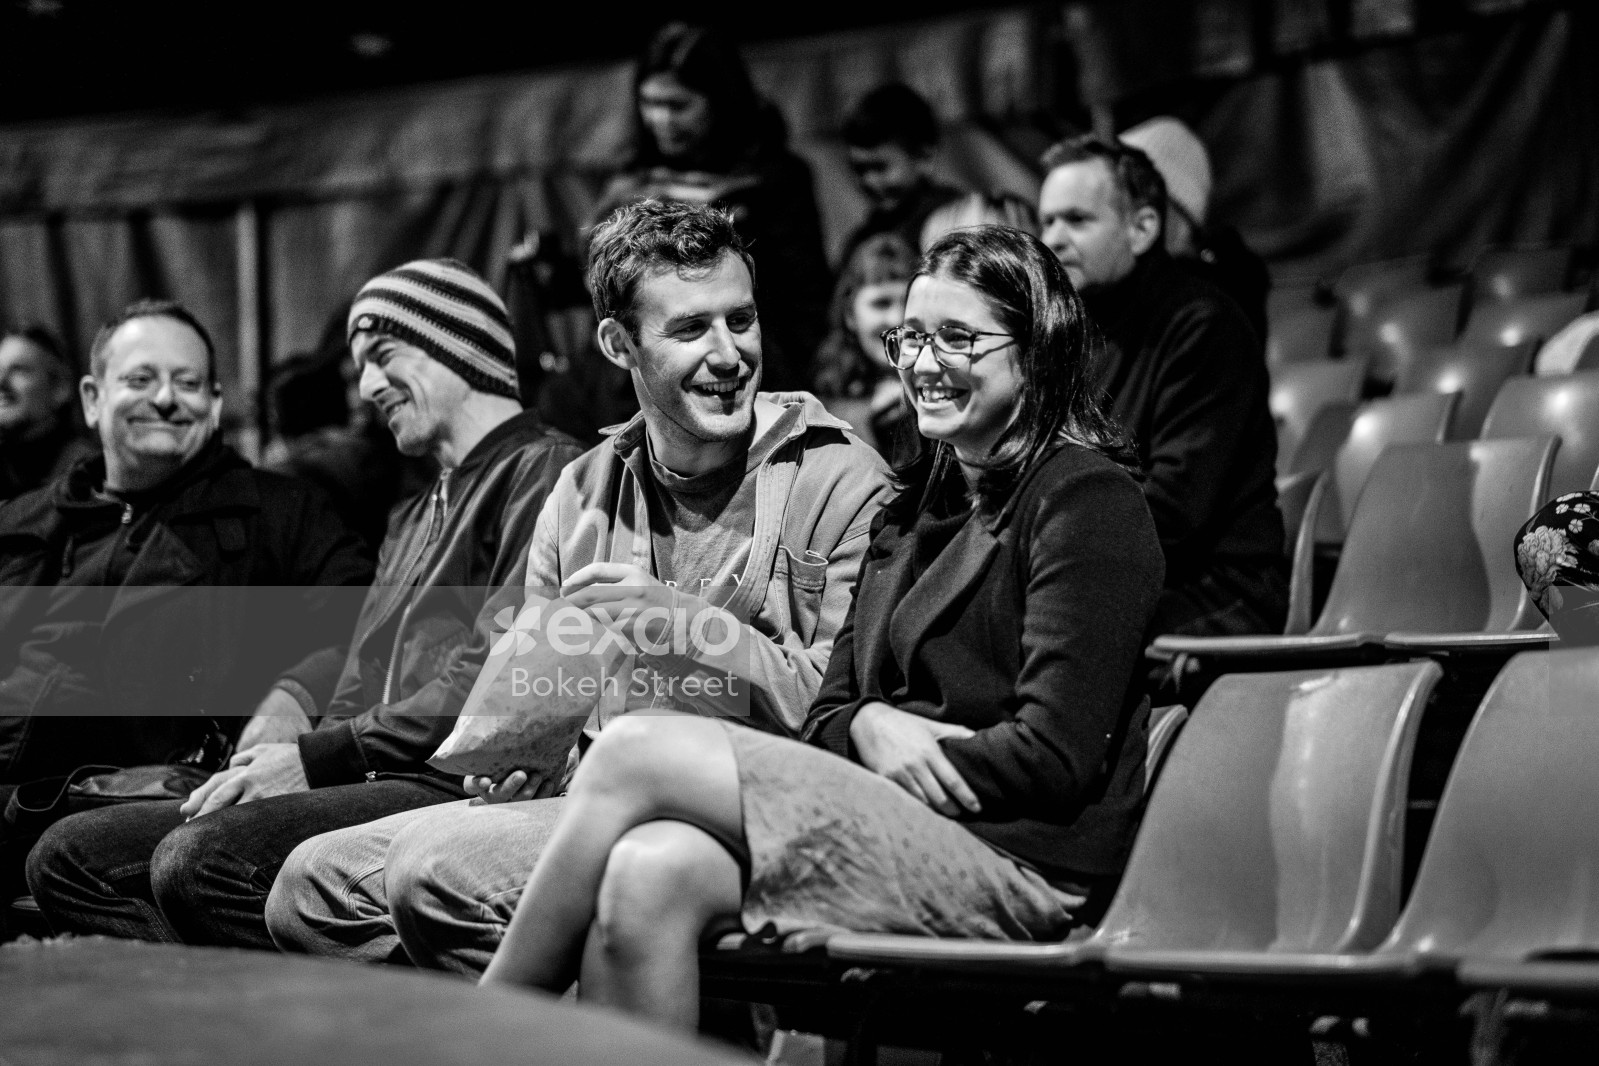 A couple at the circus enjoying a date candid black and white